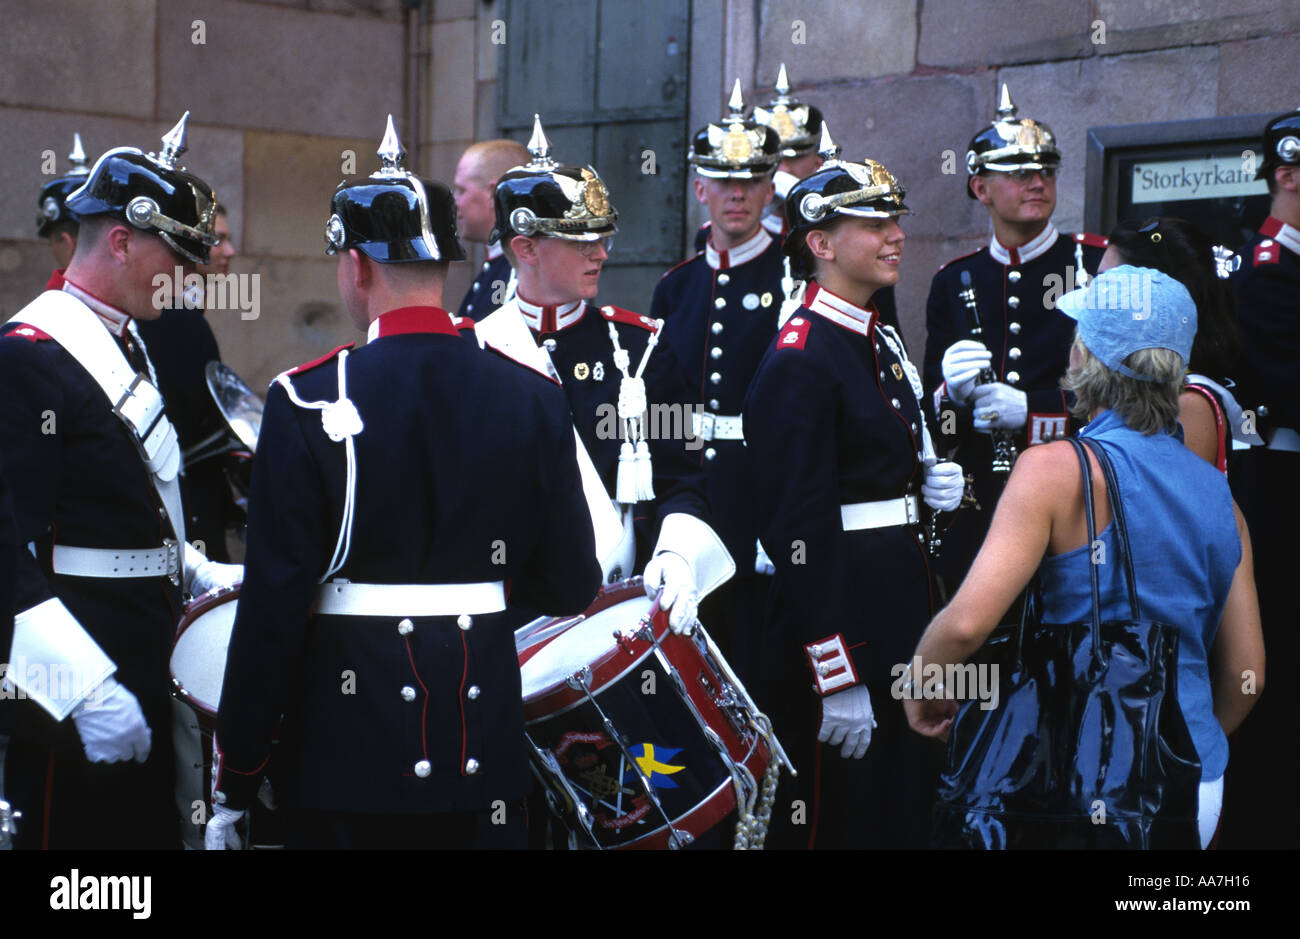 SWEDISH ARMY BAND IN STOCKHOLM Stock Photo